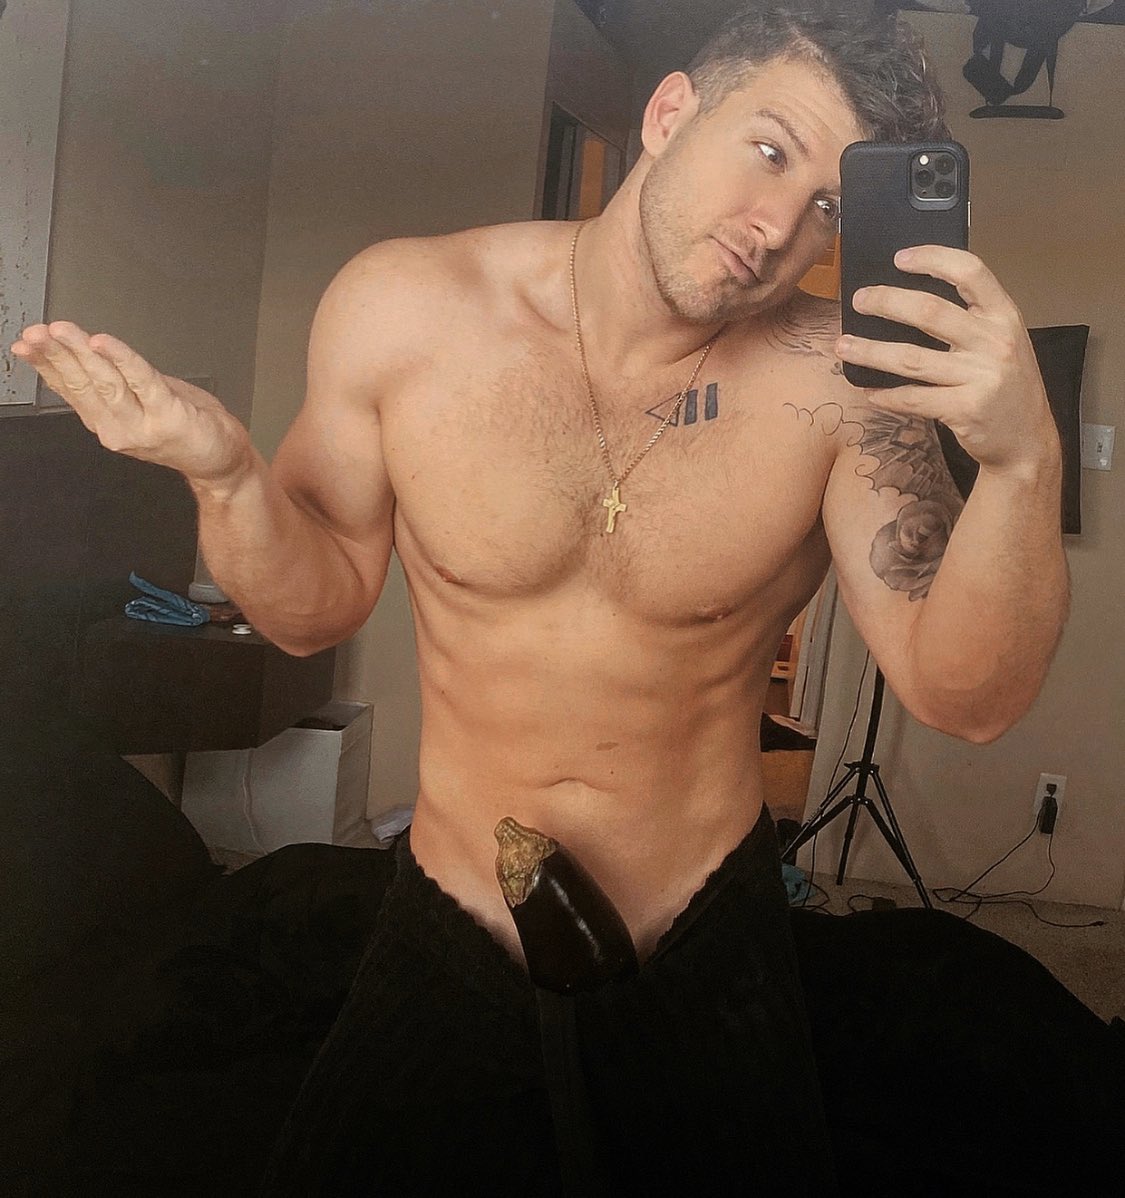 https://onlyfans.com/mikesbigeggplant.